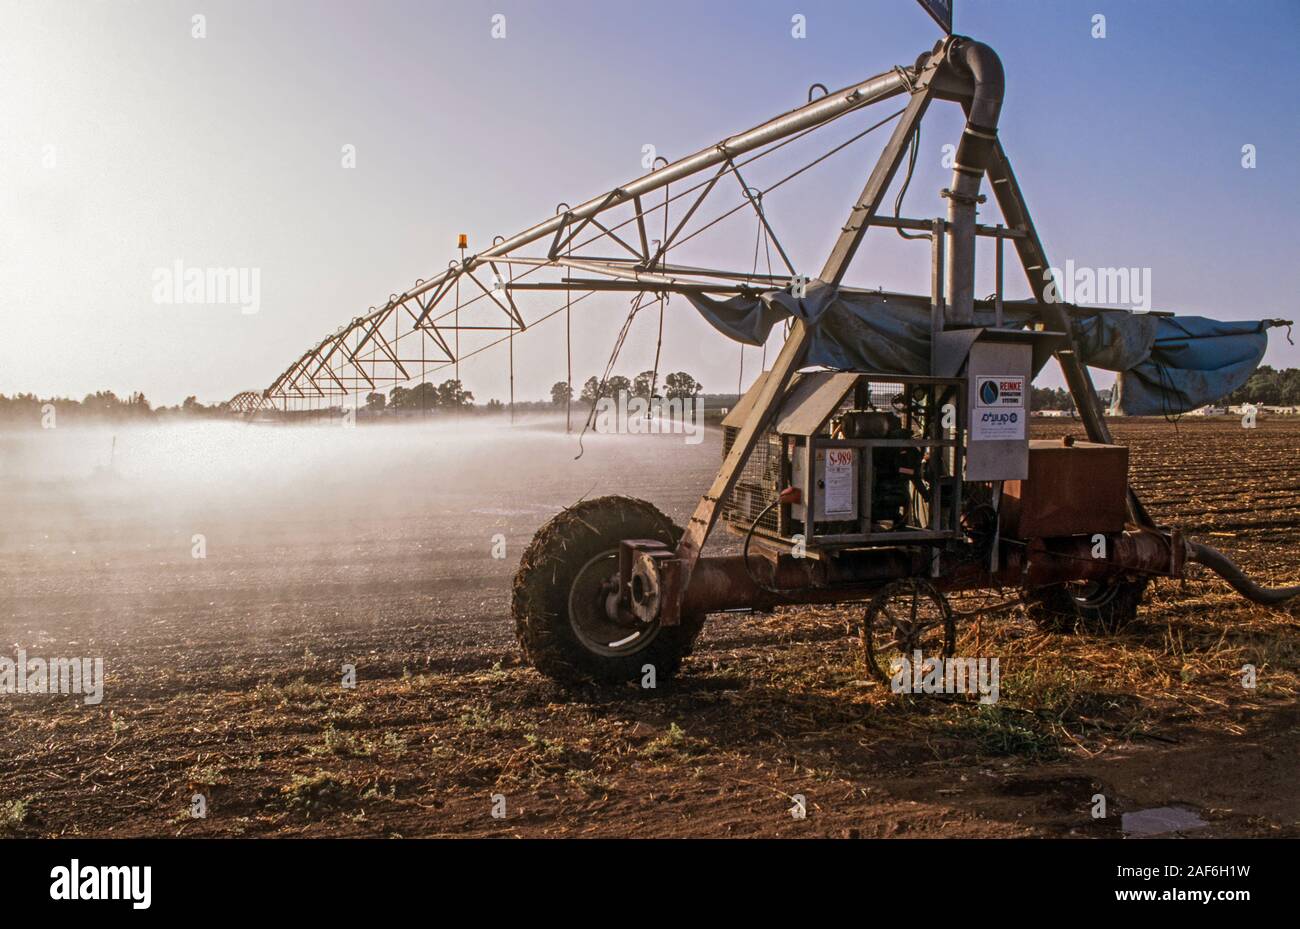 Irrigation robot watering a field. Photographed in the negev Desert, Israel Stock Photo